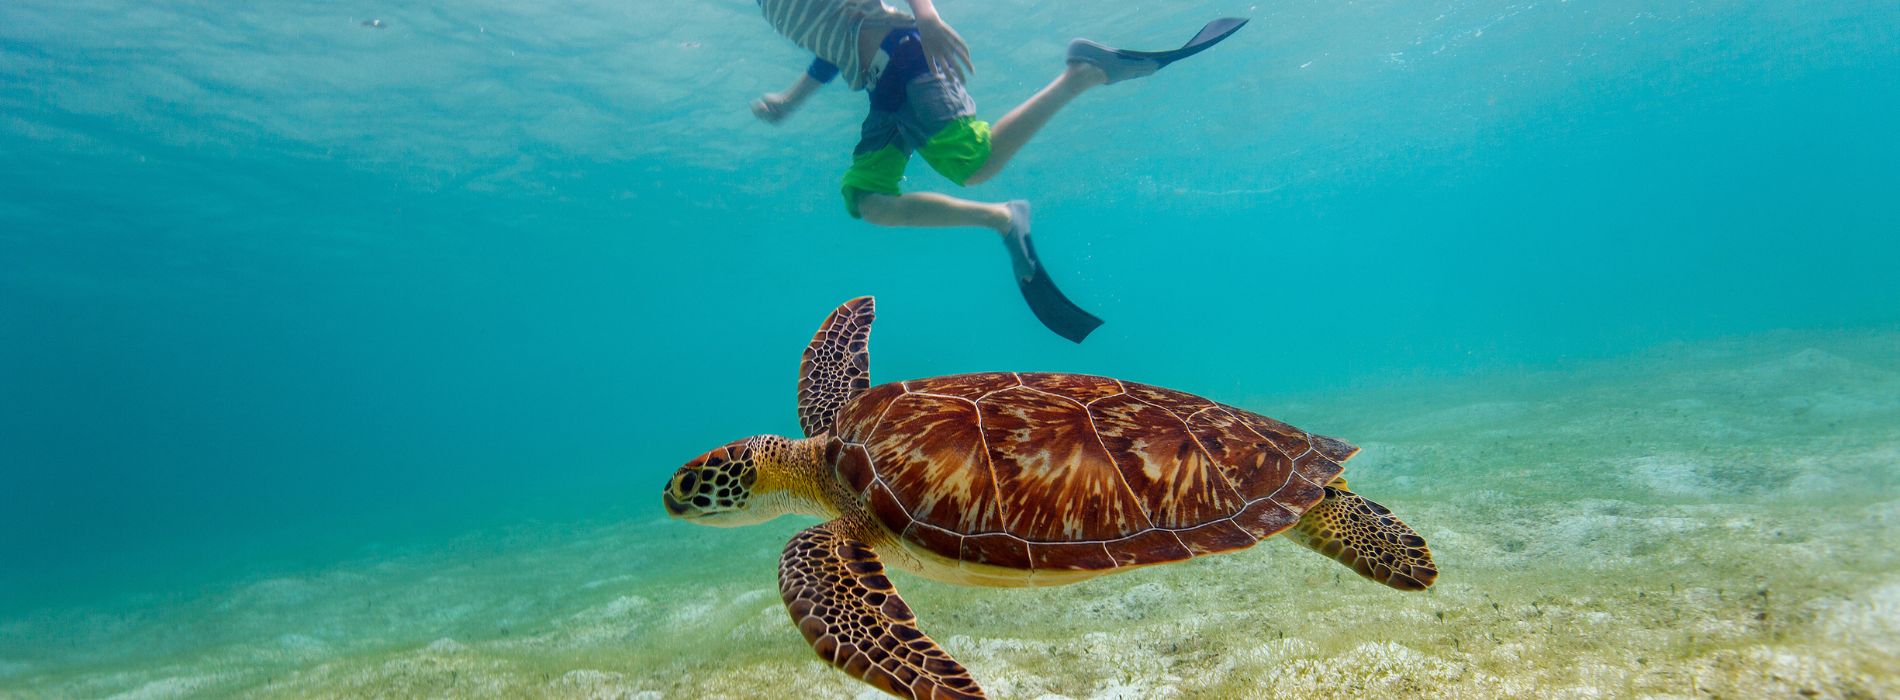 Snorkeling with Sea Turtles in St. Croix: A Magical Underwater Experience - Madeinsea©